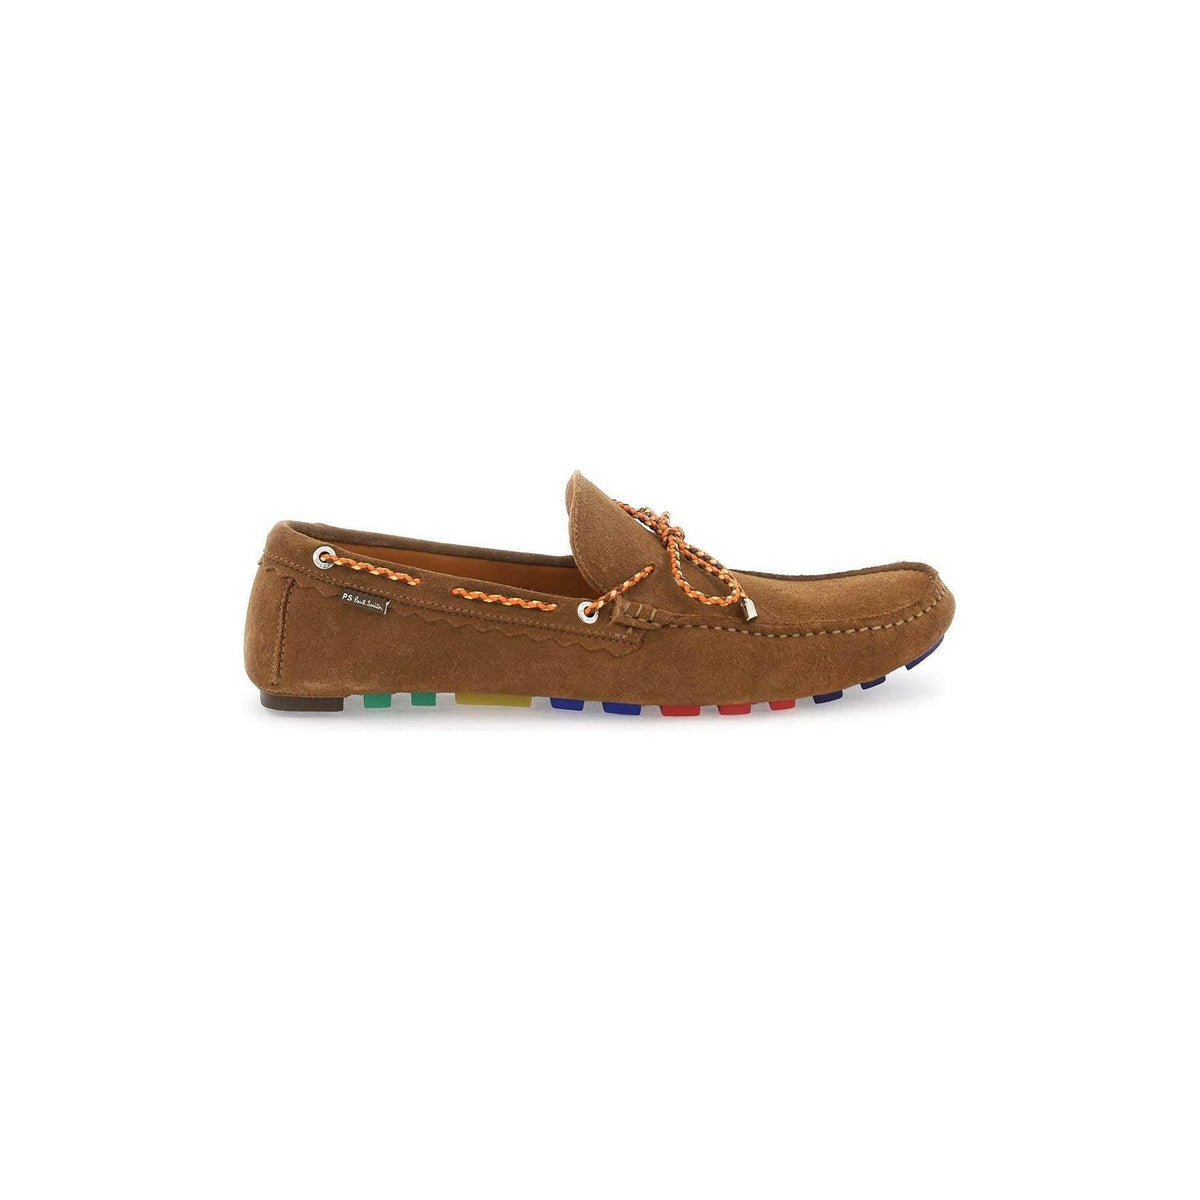 Tan Suede Springfield Driving Loafers PS PAUL SMITH JOHN JULIA.